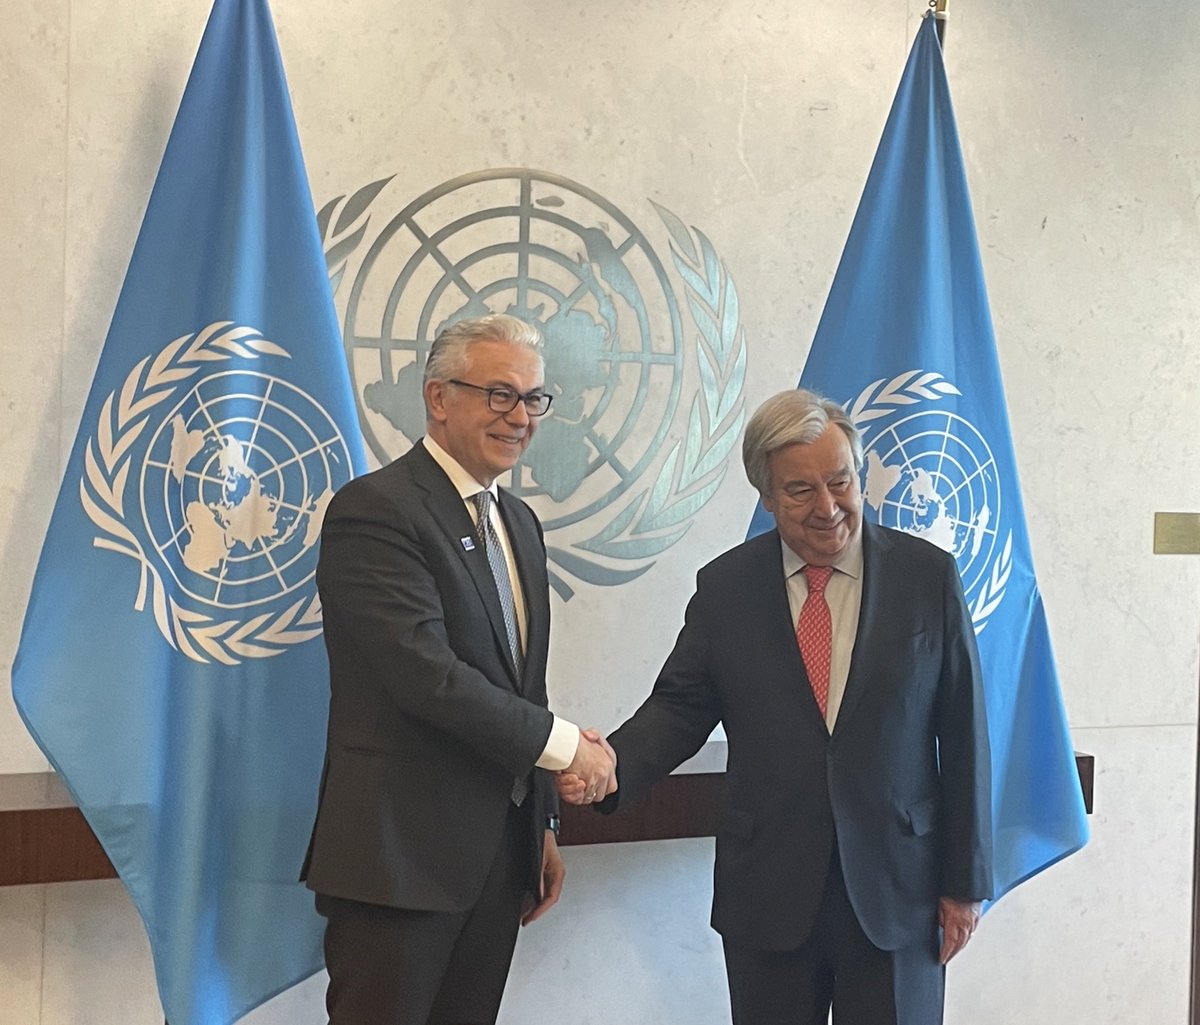 Deeper, more effective and properly institutionalised co-operation between @UN and @coe are exceptionally important for promoting and protecting peace, democracy and human rights in Europe and wider world. Very pleased that I share this view with @antonioguterres @PACE_News